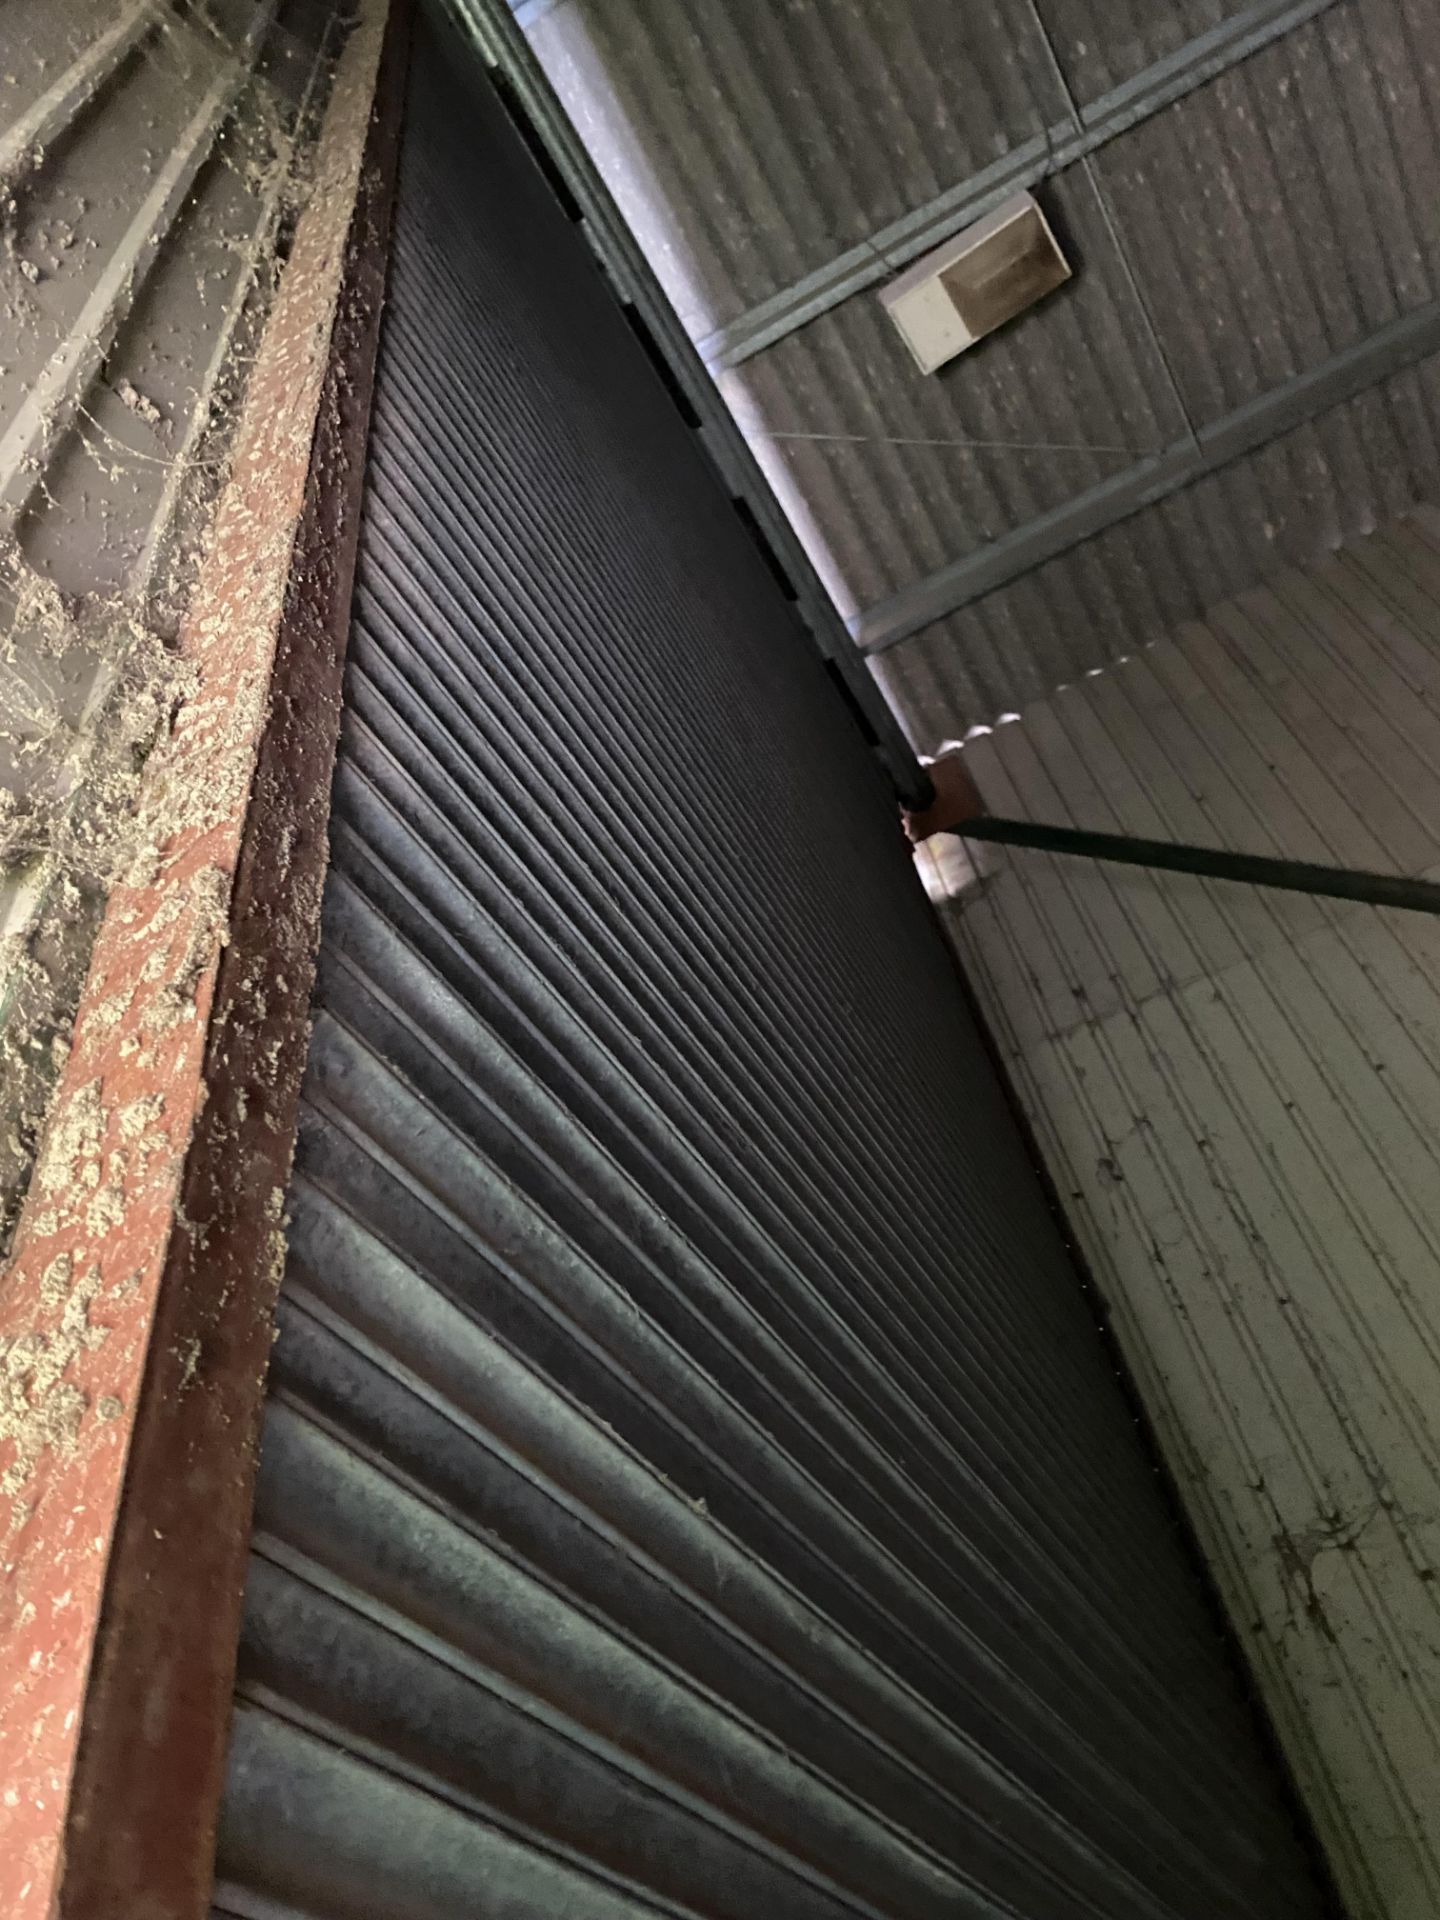 Galvanised Steel Electric Lift Roller Shutter Door, approx. 3.6m wide x 6.8m high, purchaser - Image 2 of 3